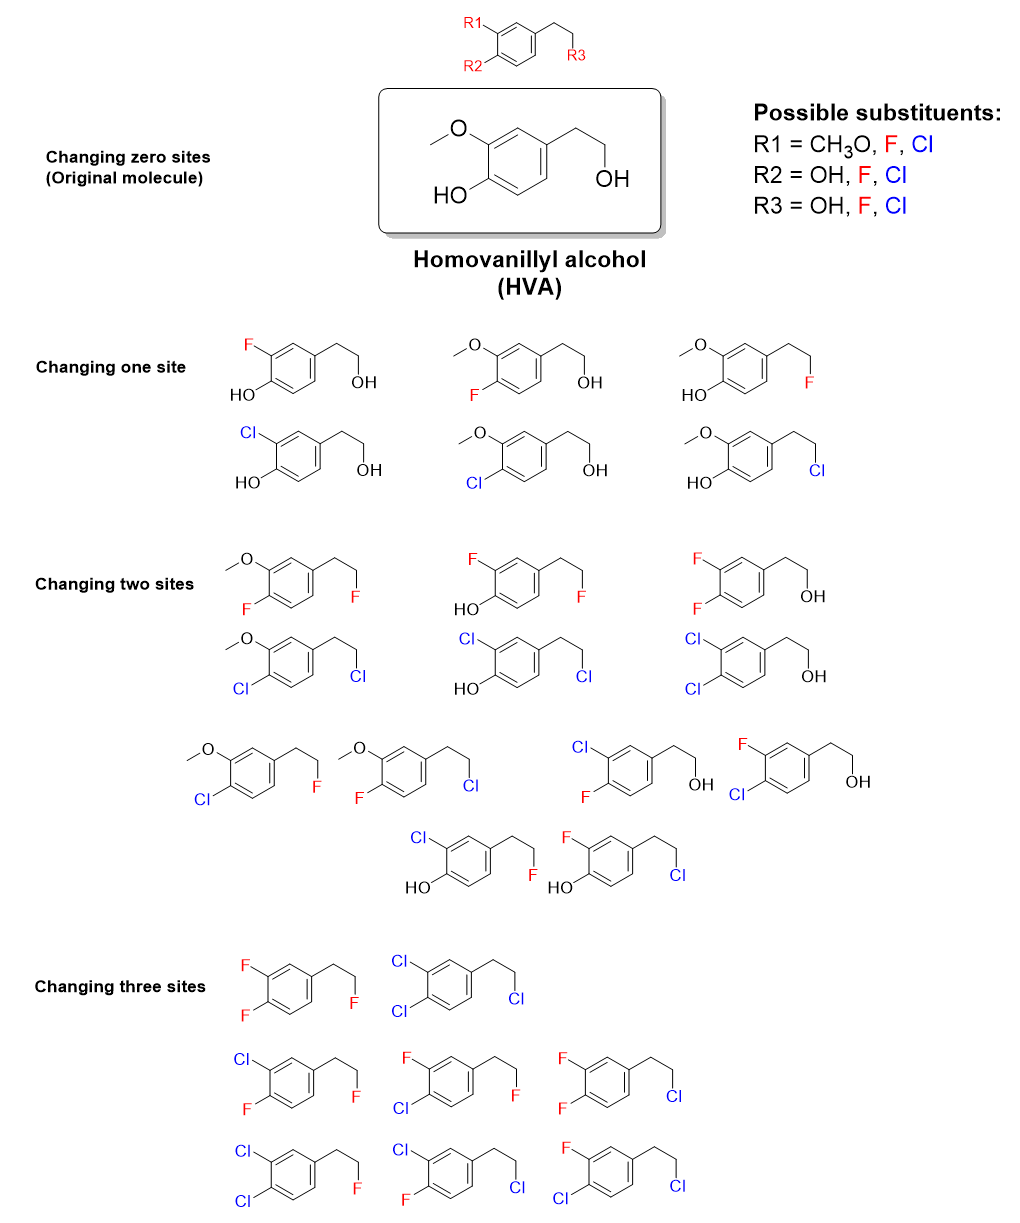 A chart with line-bond drawings of compounds similar or identical to homovanillyl alcohol. Above the chart, the line-bond drawing shows the same diagram as the middle diagram in Figure 4.4.b, with R1, R2, and R3 highlighted in red. This is the skeletal structure. In the first row of the chart, the left cell says “Changing zero sites (original molecule)”, the middle cell shows the structure of homovanillyl alcohol, as described in Figure 4.4.a, and the right cell shows possible substituents for R1 = methoxy (CH3O), fluoro (F), or chloro (Cl), R2 = hydroxy (OH), fluoro (F), or chloro (Cl), and R3 = hydroxy (OH), fluoro (F), or chloro (Cl).   In the second row of the chart, the left cell says “Changing one site”, and the subsequent cells in this row show six molecules, in which a fluorine atom or a chlorine atom replaces one substituent at R1, R2, or R3 in the skeletal structure shown at the top of the diagram.   In the third row of the chart, the left cell says “Changing two sites”. The subsequent cells in this row show twelve molecules, in which two of the three substituents R1, R2, and/or R3, in the skeletal structure shown at the top of the diagram are replaced by some combination of two fluorine atoms, two chlorine atoms, or one fluorine atom and one chlorine atom.   In the fourth row of the chart, the left cell says “Changing three sites”. The subsequent cell in this row shows eight molecules, in which all three substituents R1, R2, and R3, in the skeletal structure shown at the top of the diagram are replaced by some combination of fluorine and chlorine atoms.